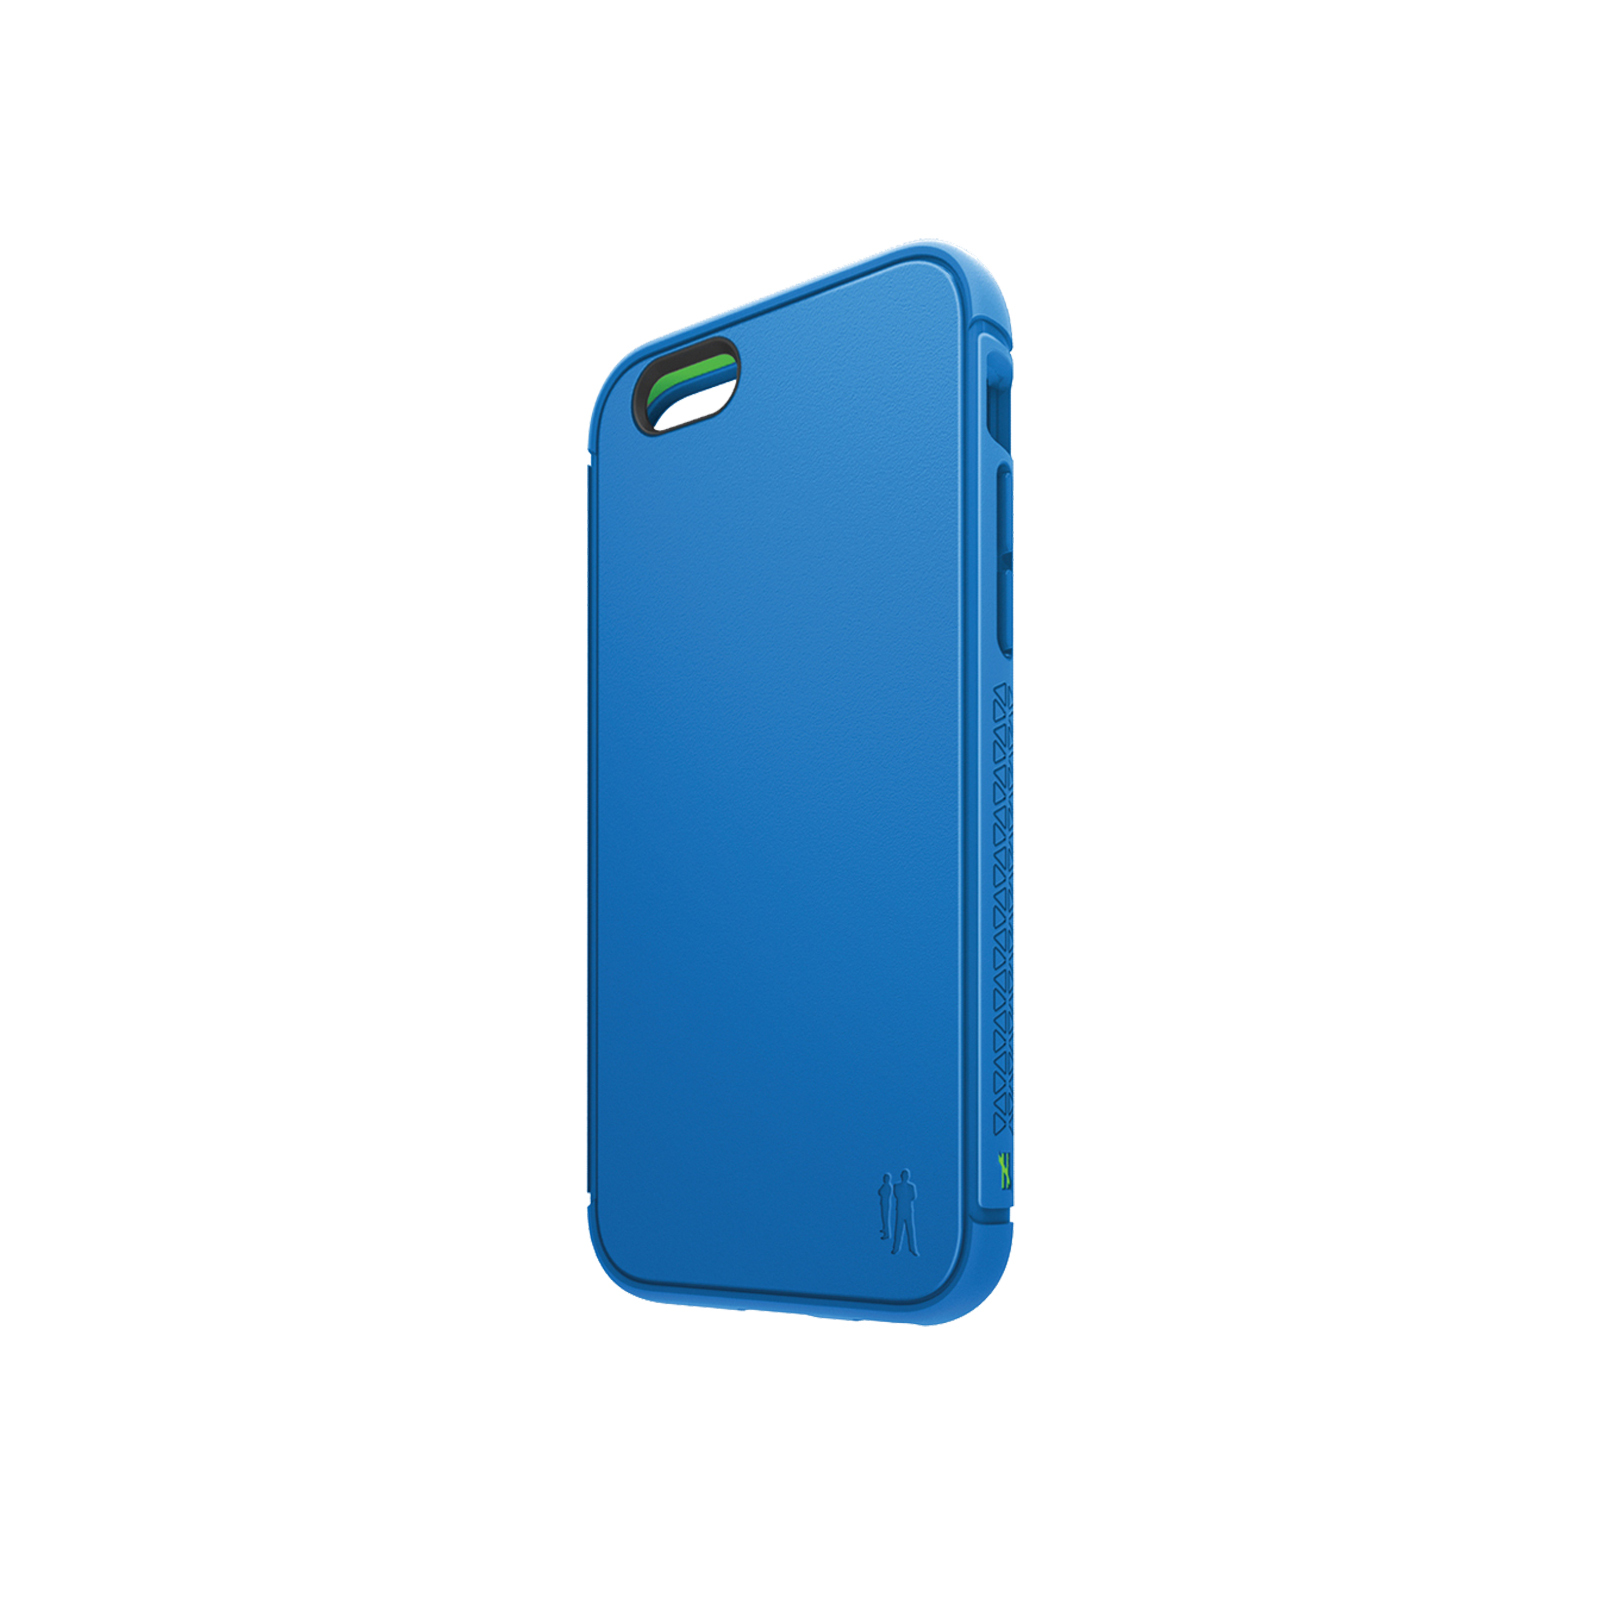 Contact iPhone 7 / 8 Case [Blue]